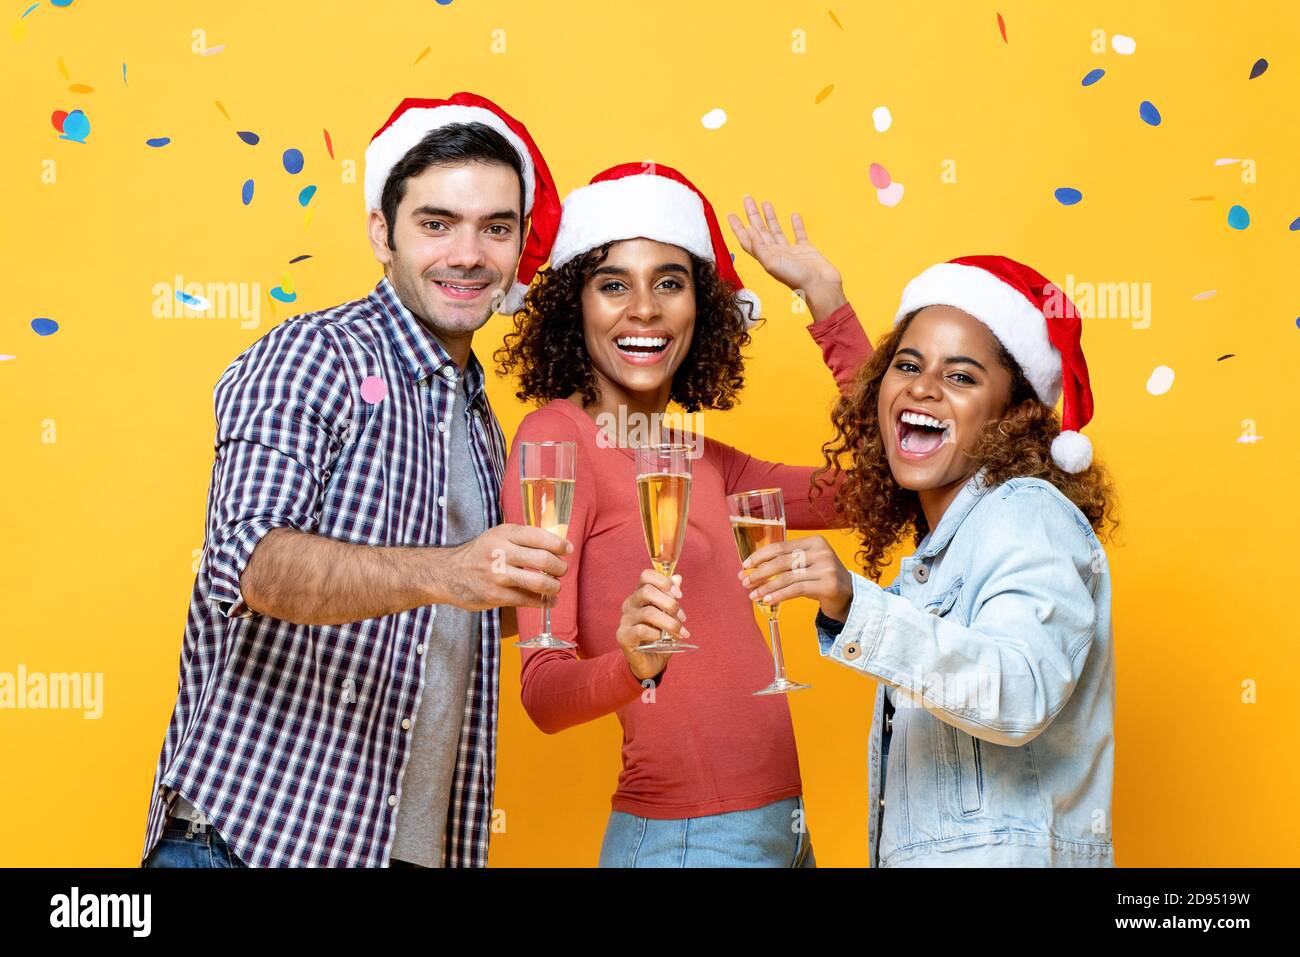 Group of happy multiracial friends celebrating Christmas drinking champagne together on yellow studio background with confetti Stock Photo